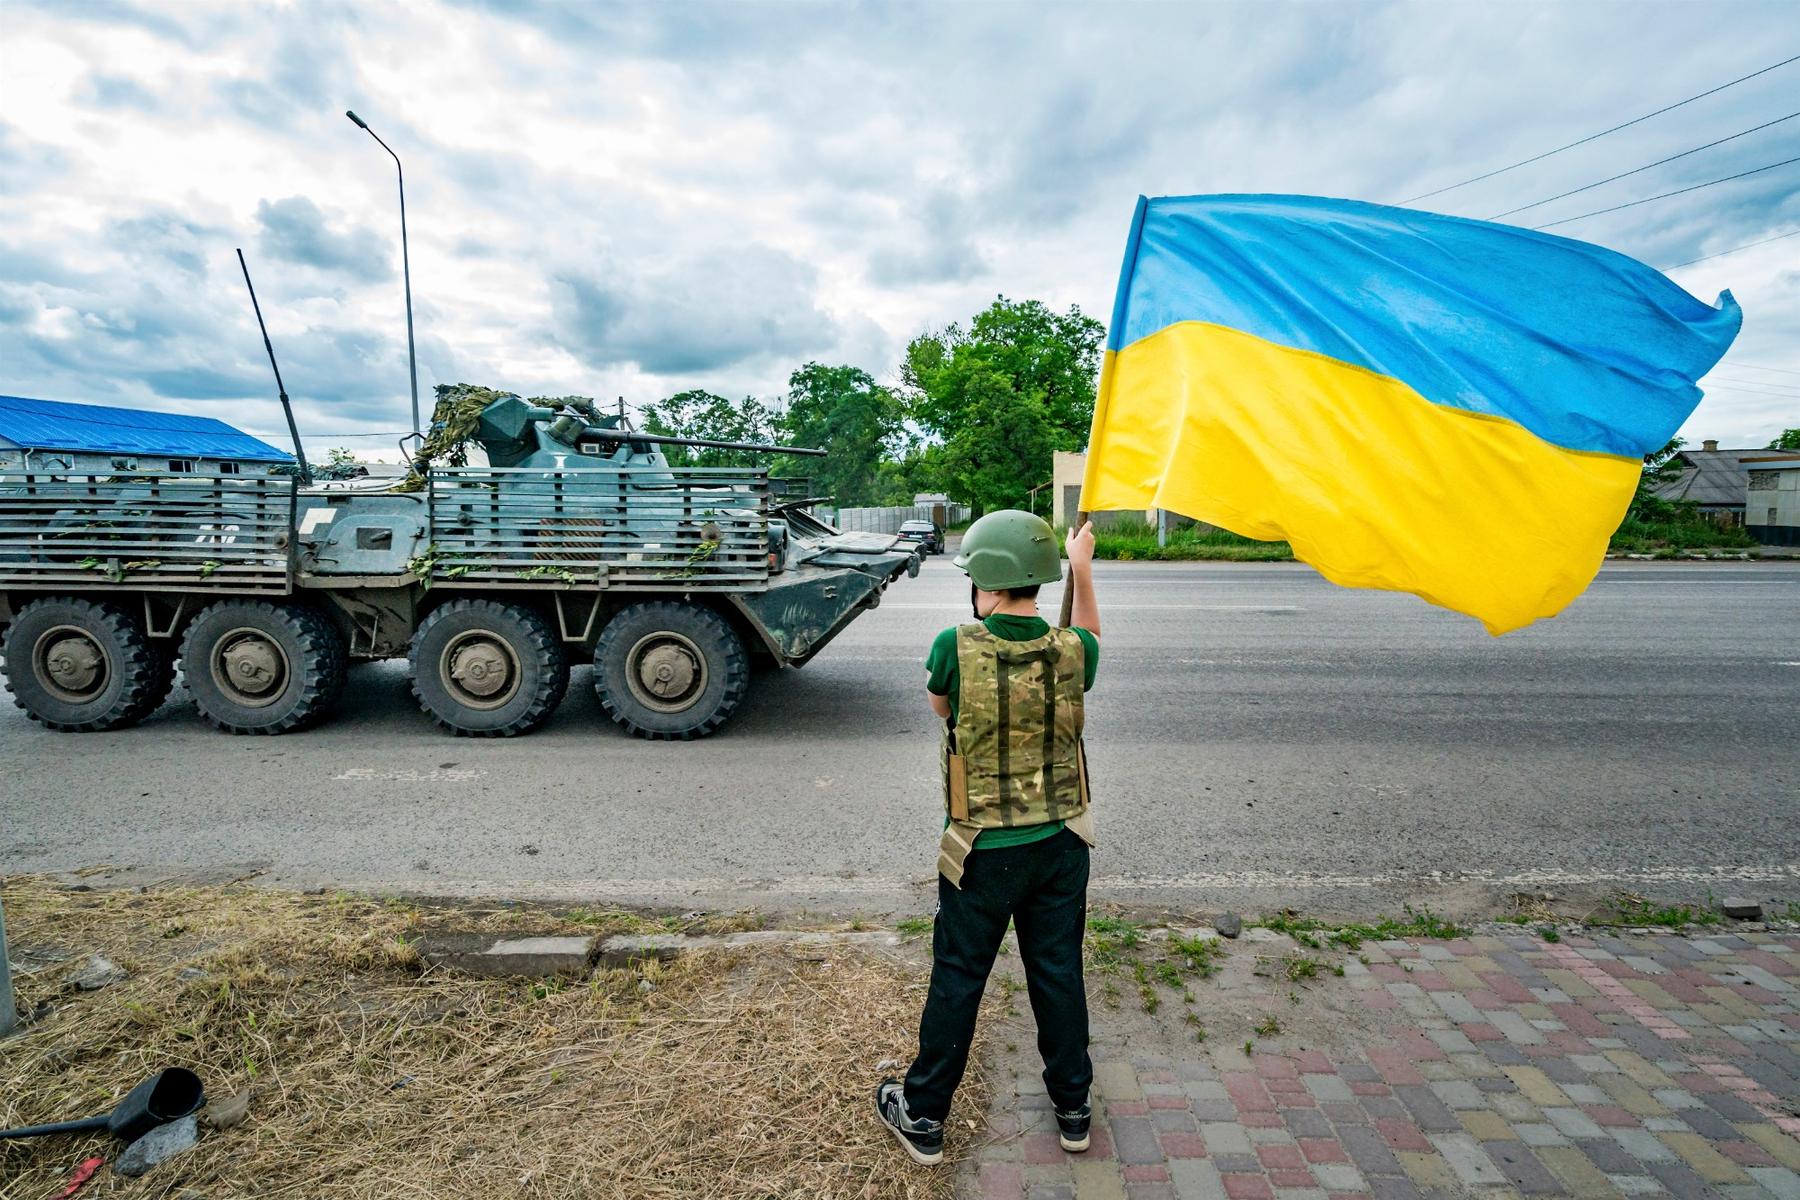 Battle for Kyiv: How Ukrainian forces defended and saved their